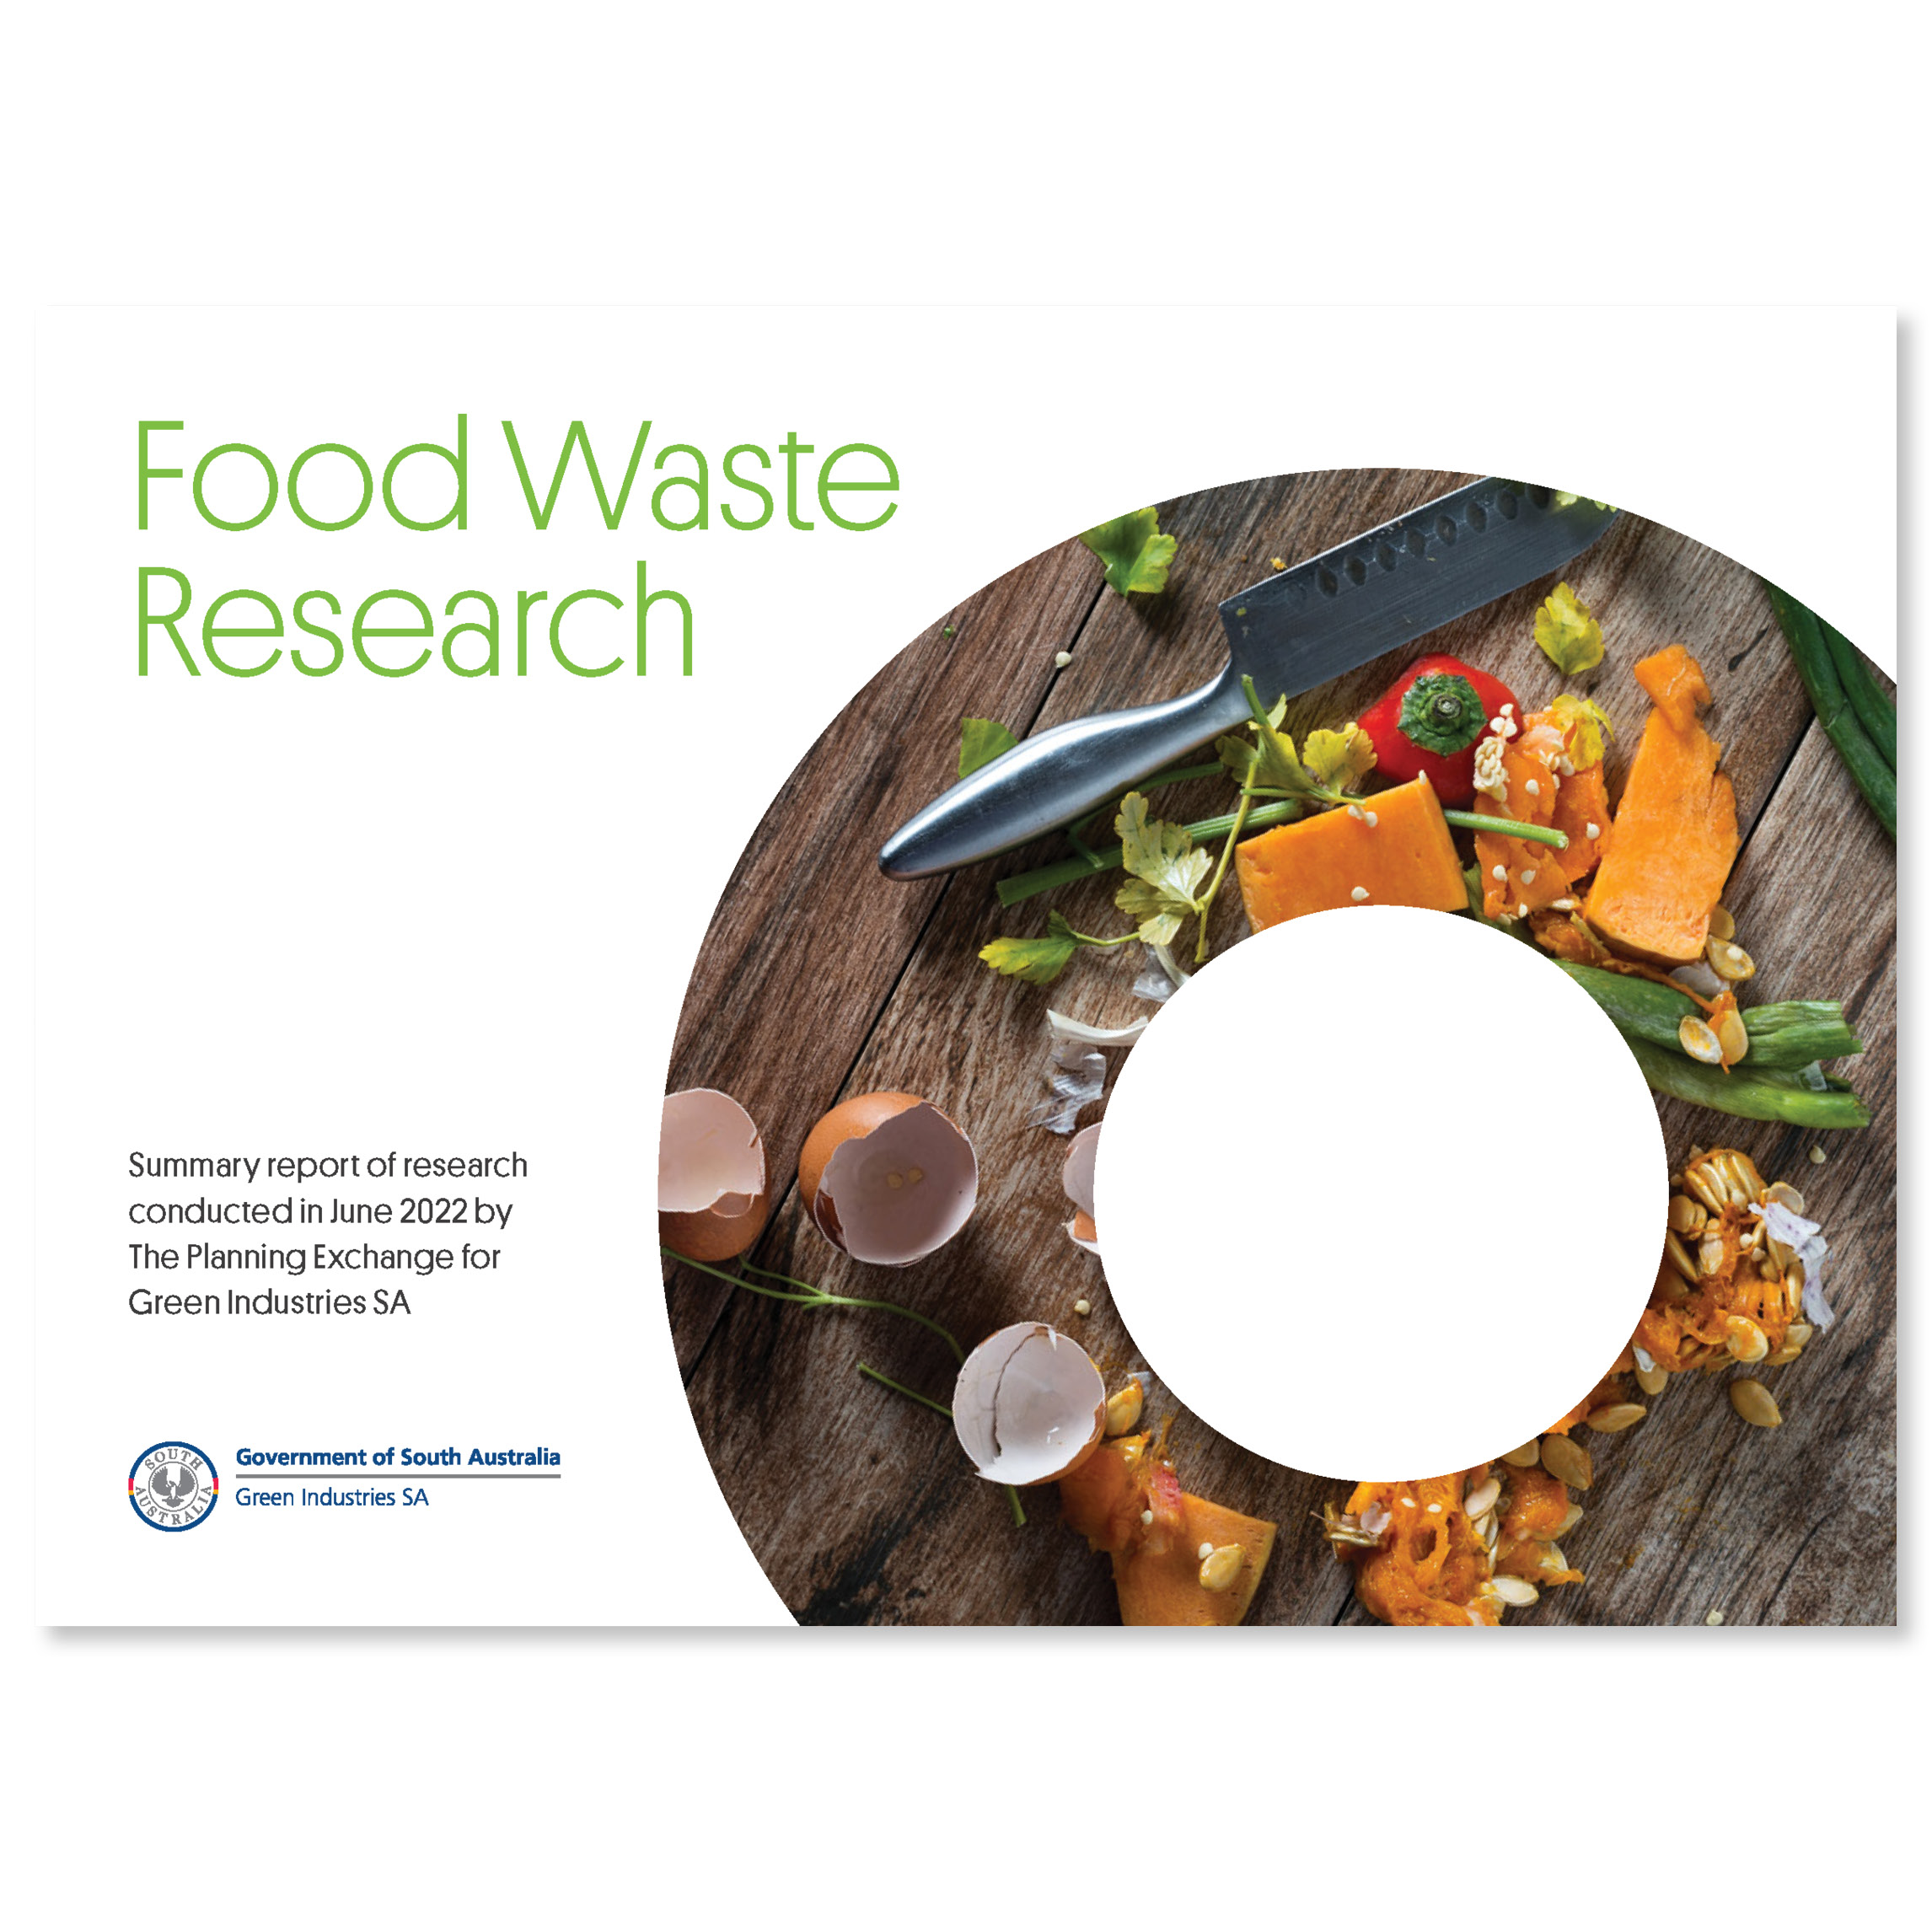 Food waste research – Summary report